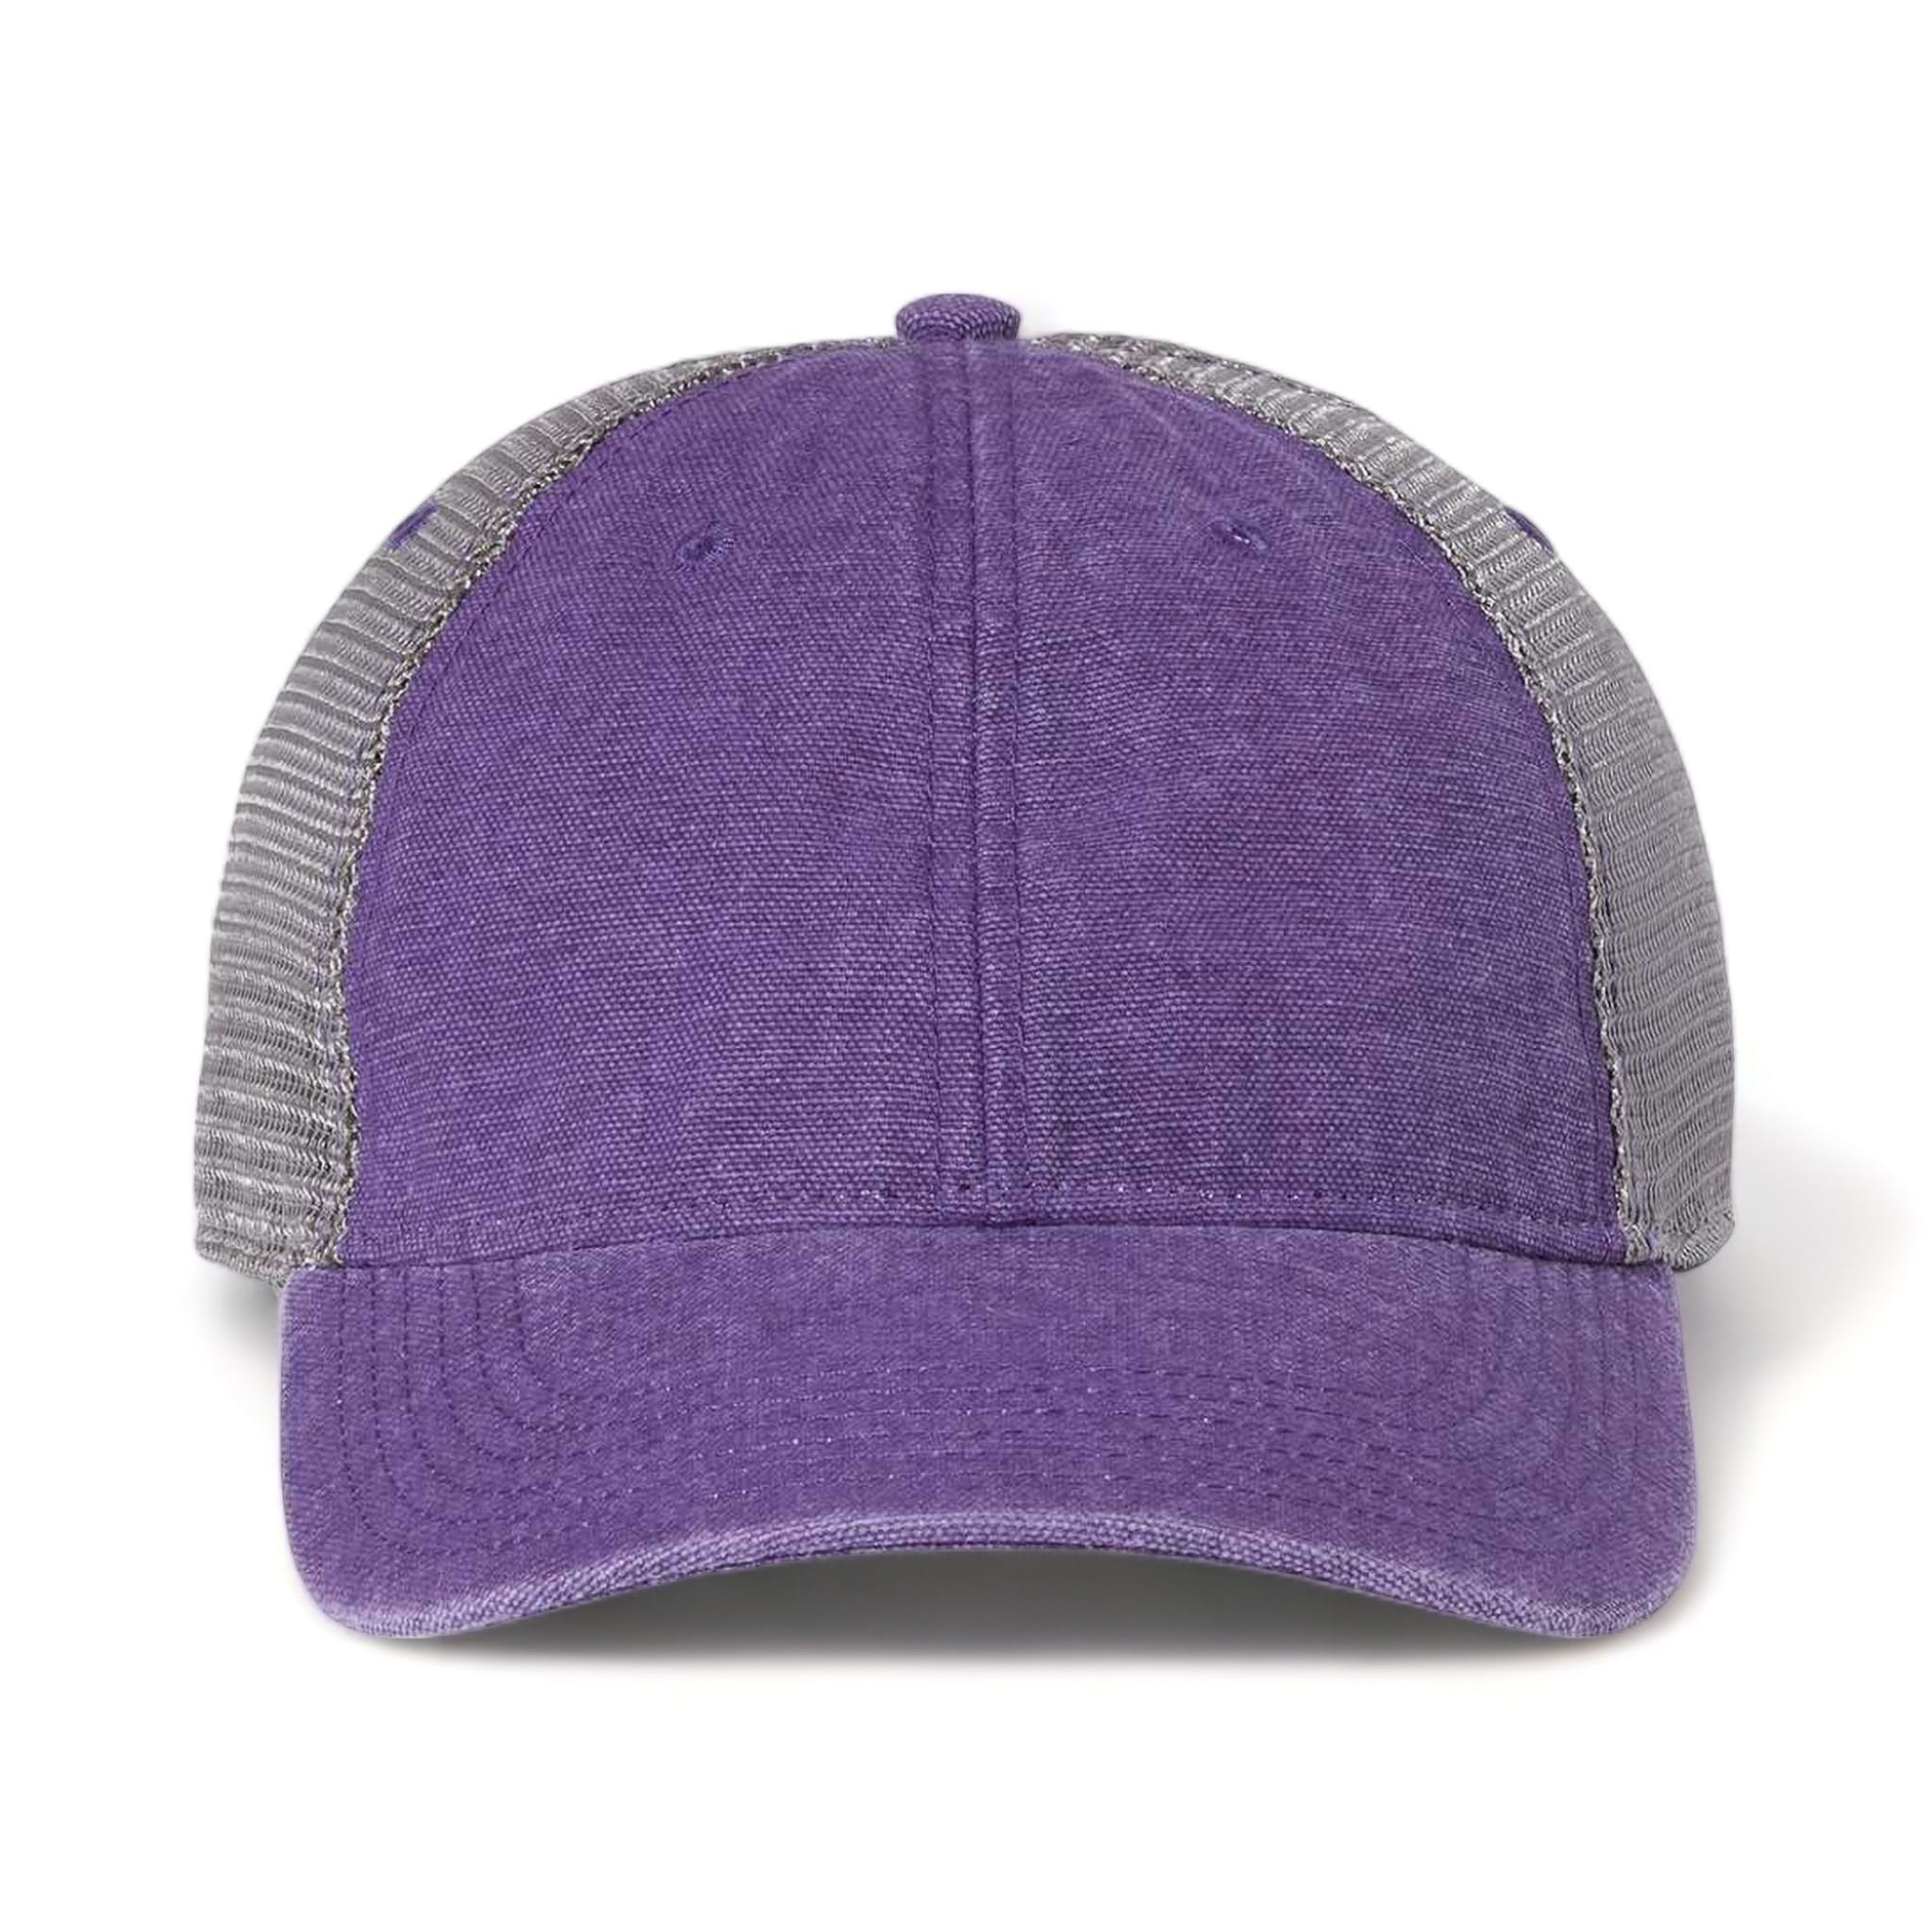 Front view of LEGACY DTA custom hat in purple and grey